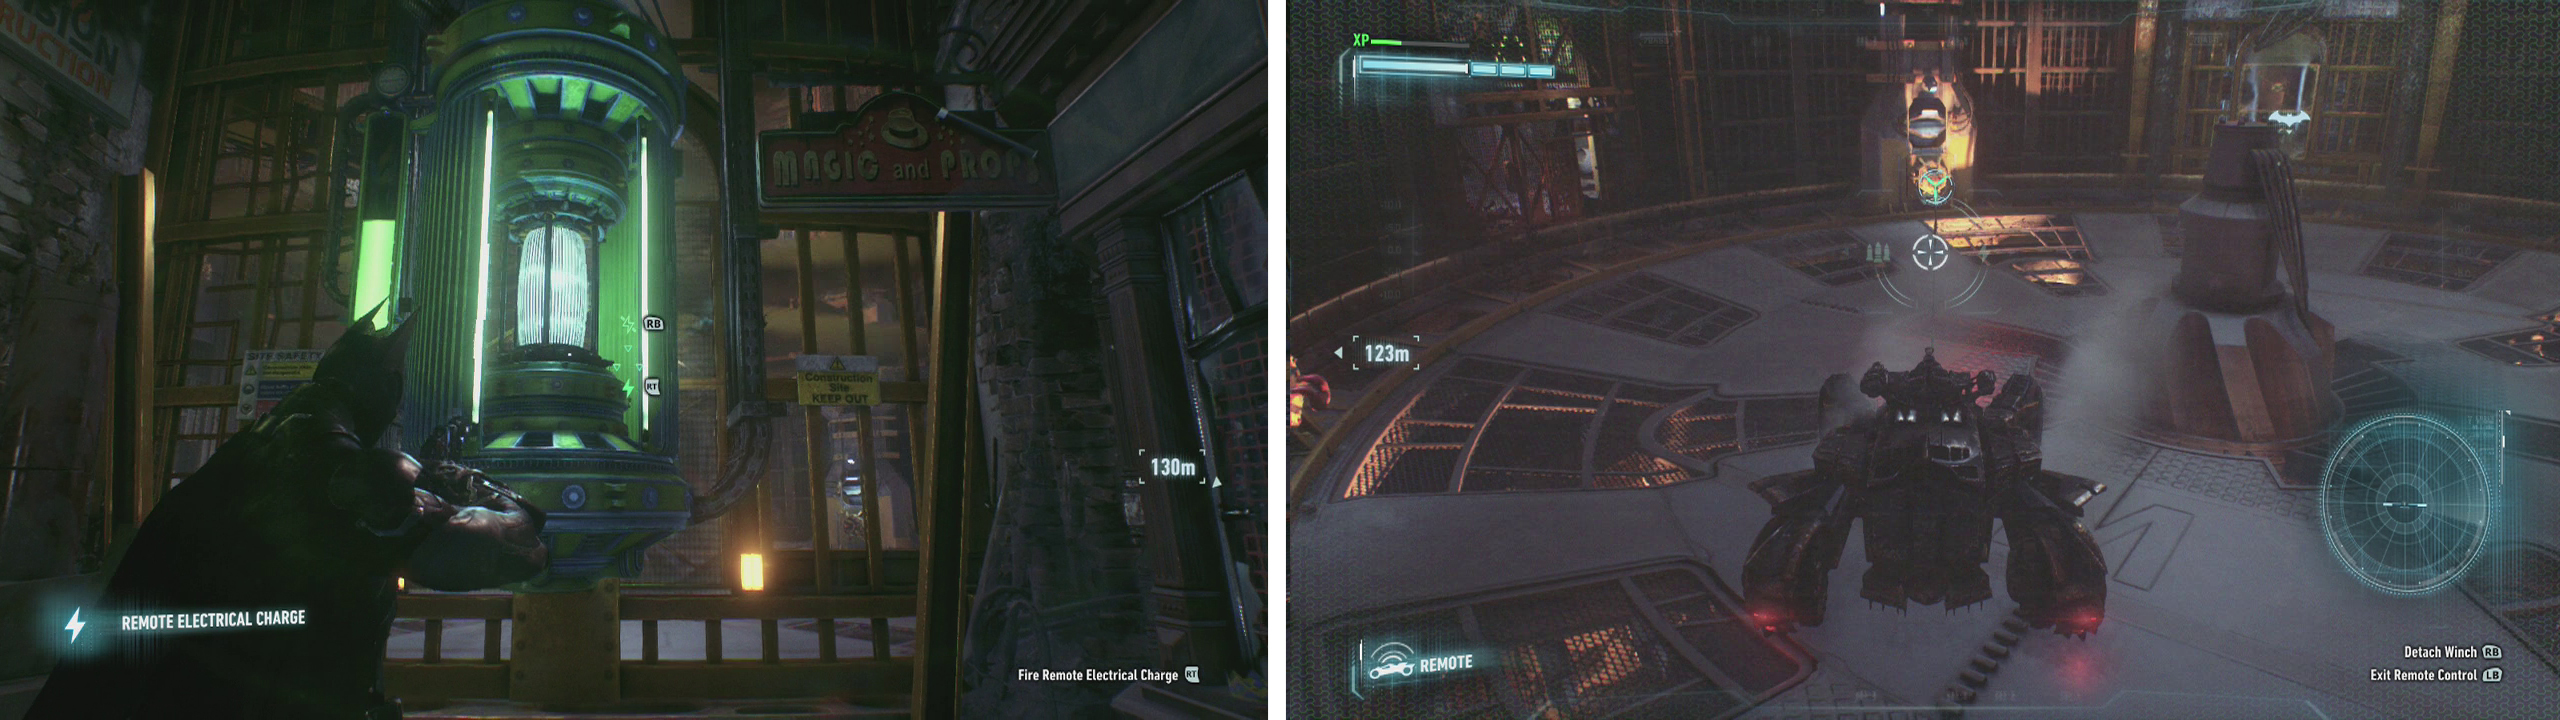 After disabling the second generator (left) lower the Batmobile to the bottom of the room and use the anchor points to lower the floor (right).